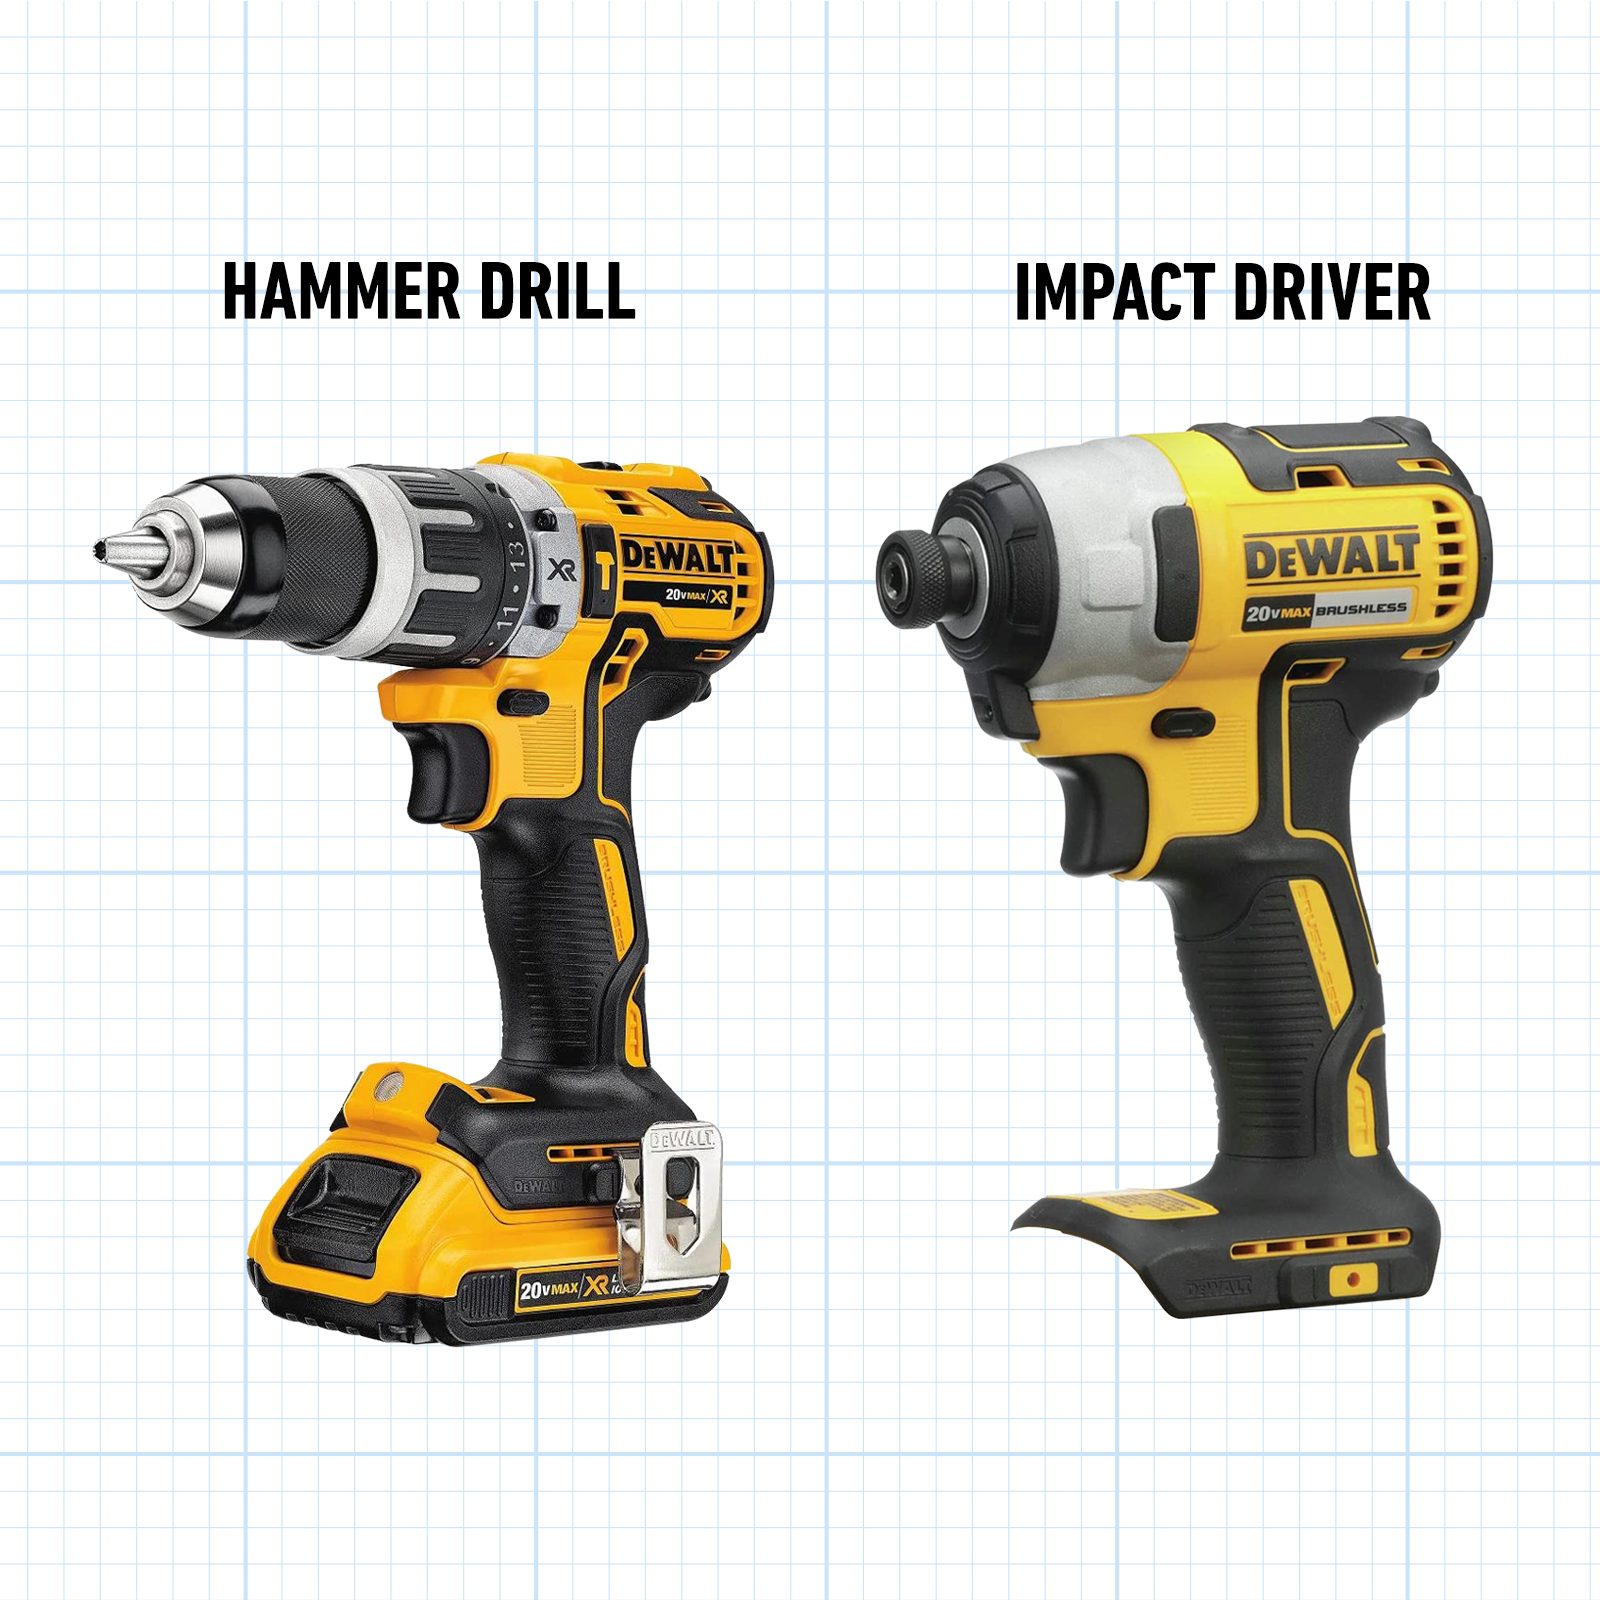 Hammer Drill vs. Impact Driver: What's the Difference?